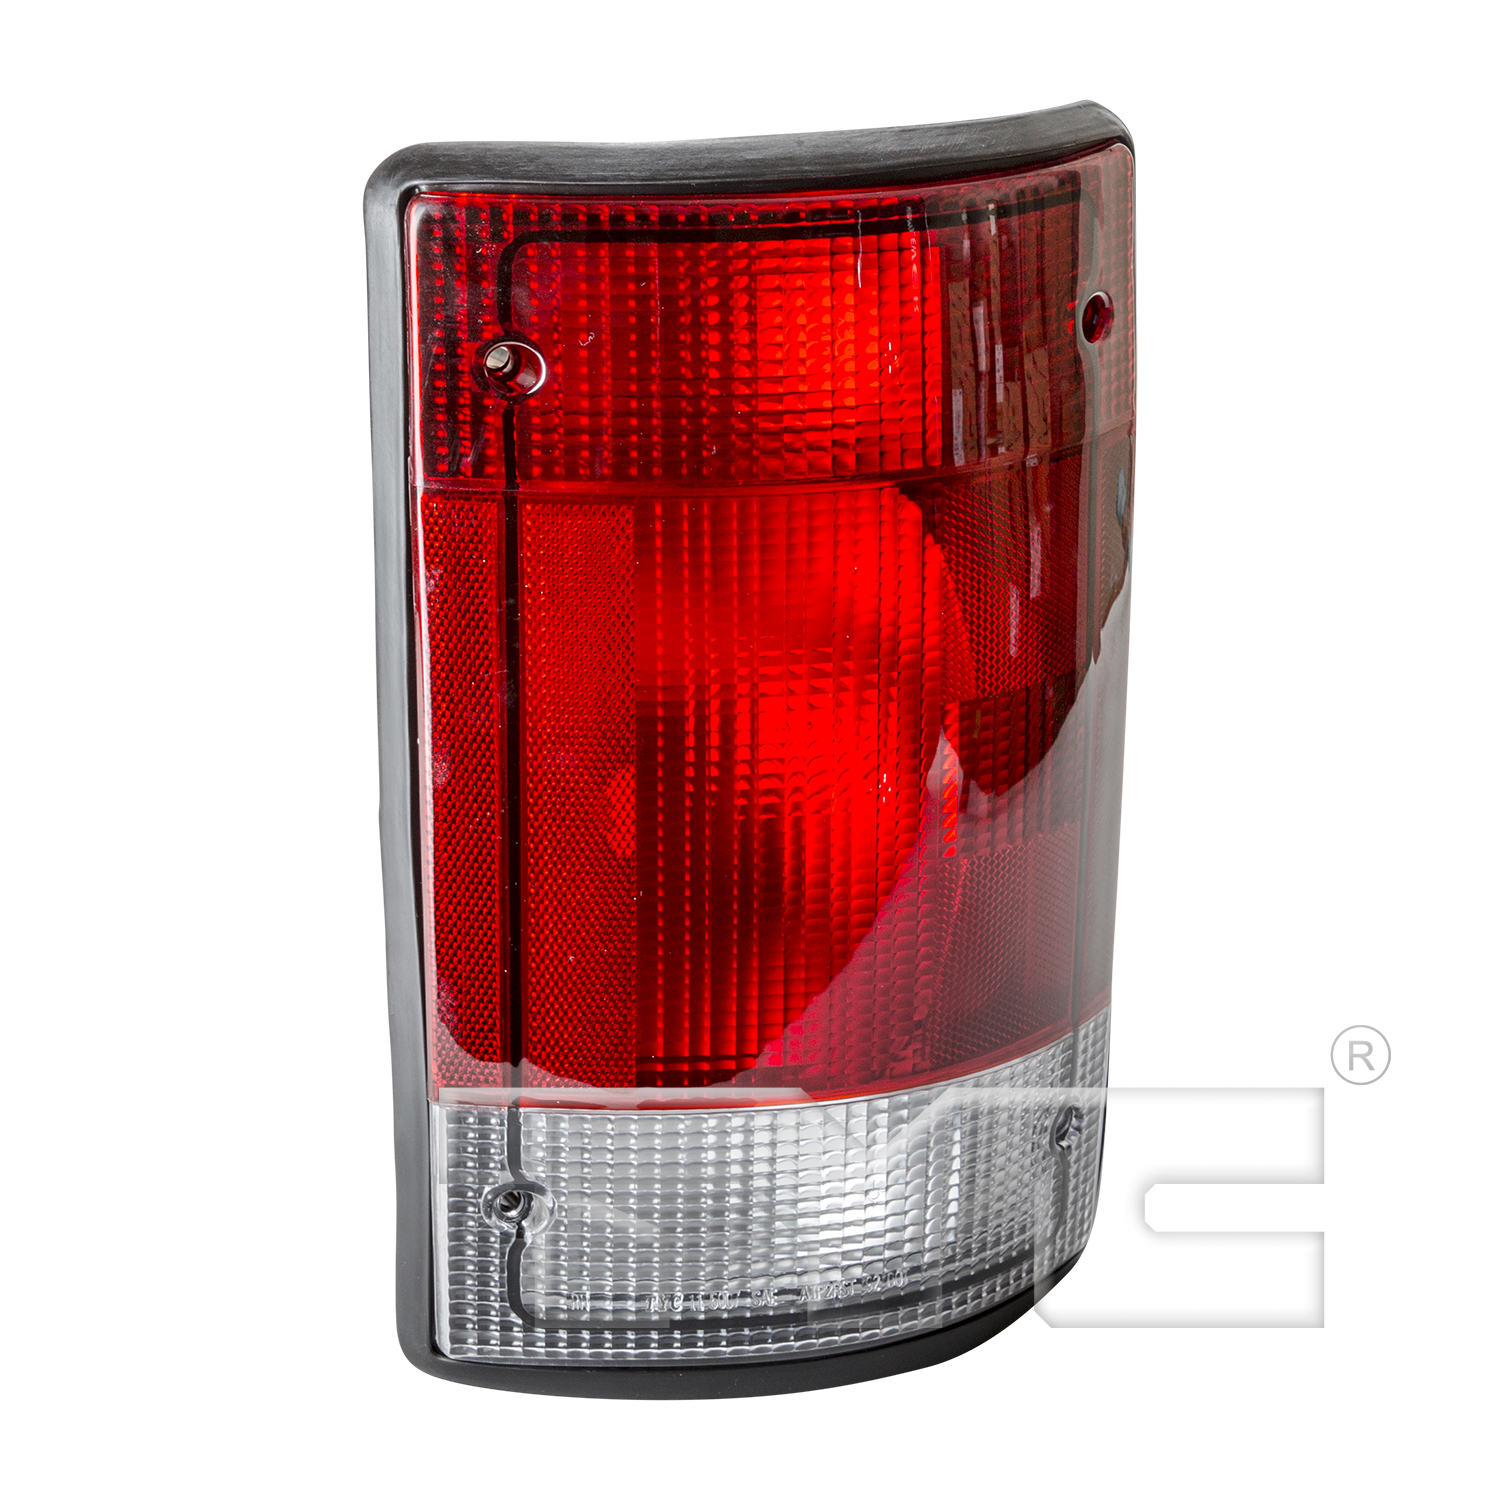 Aftermarket TAILLIGHTS for FORD - E-450 ECONOLINE SUPER DUTY, E-450 ECONOLINE SUPER DUTY,99-02,RT Taillamp assy